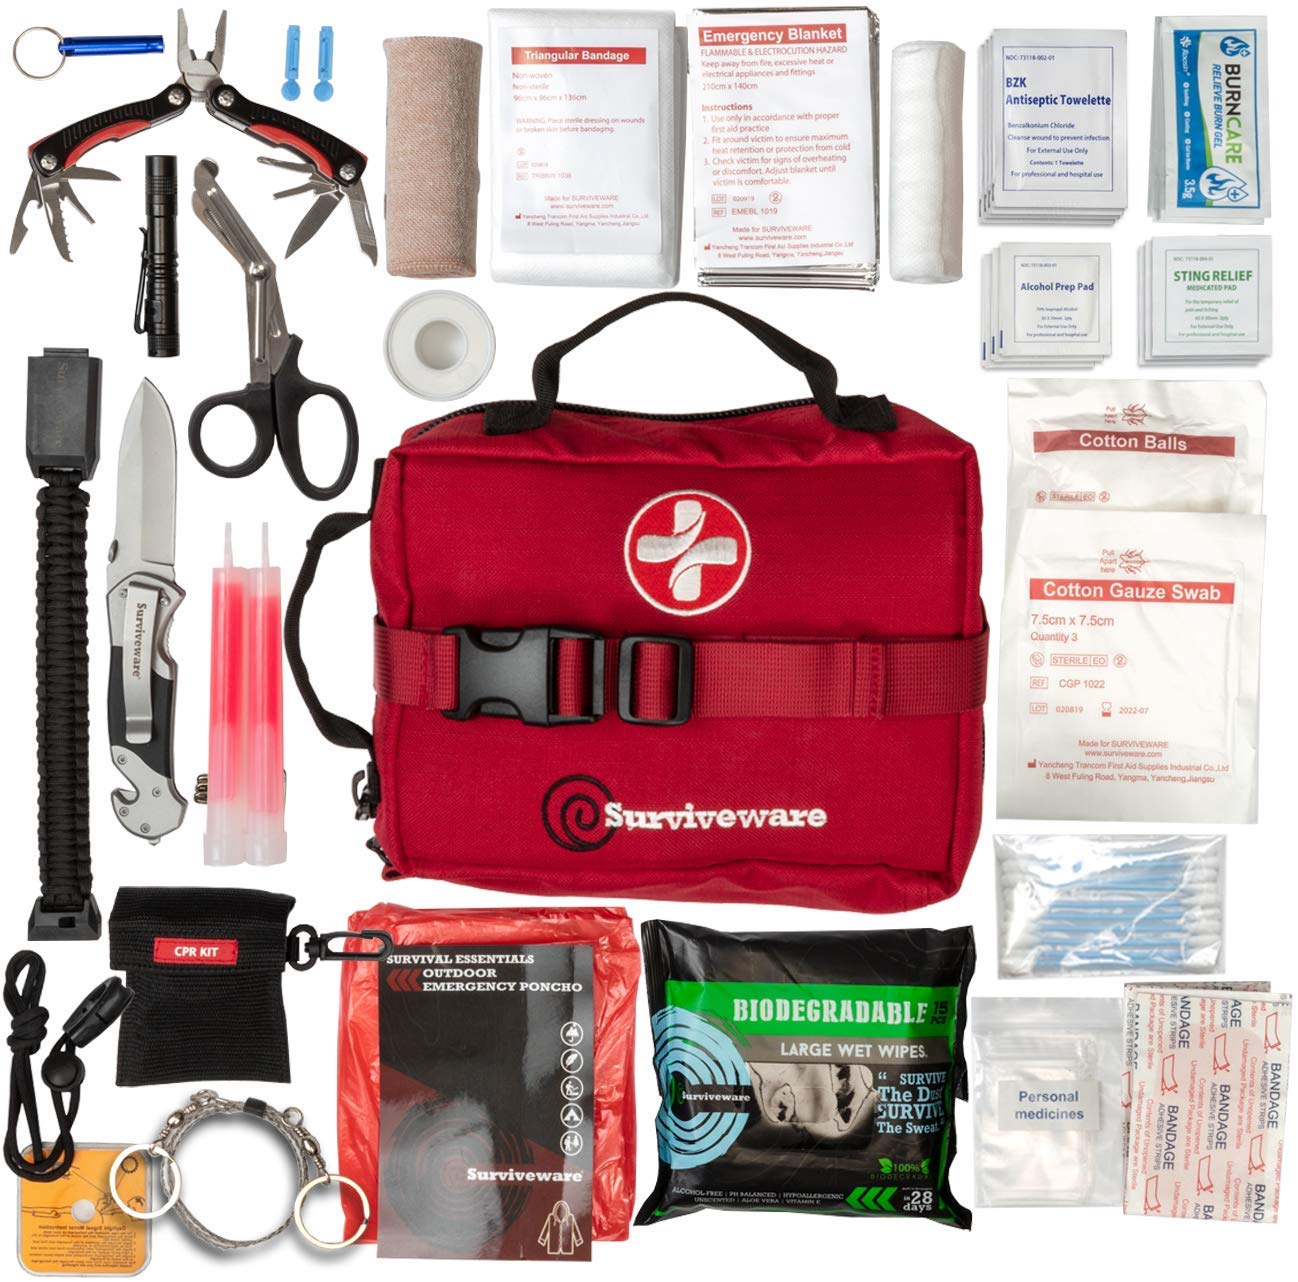 Surviveware First Aid Kit Large Kit expanded view contents